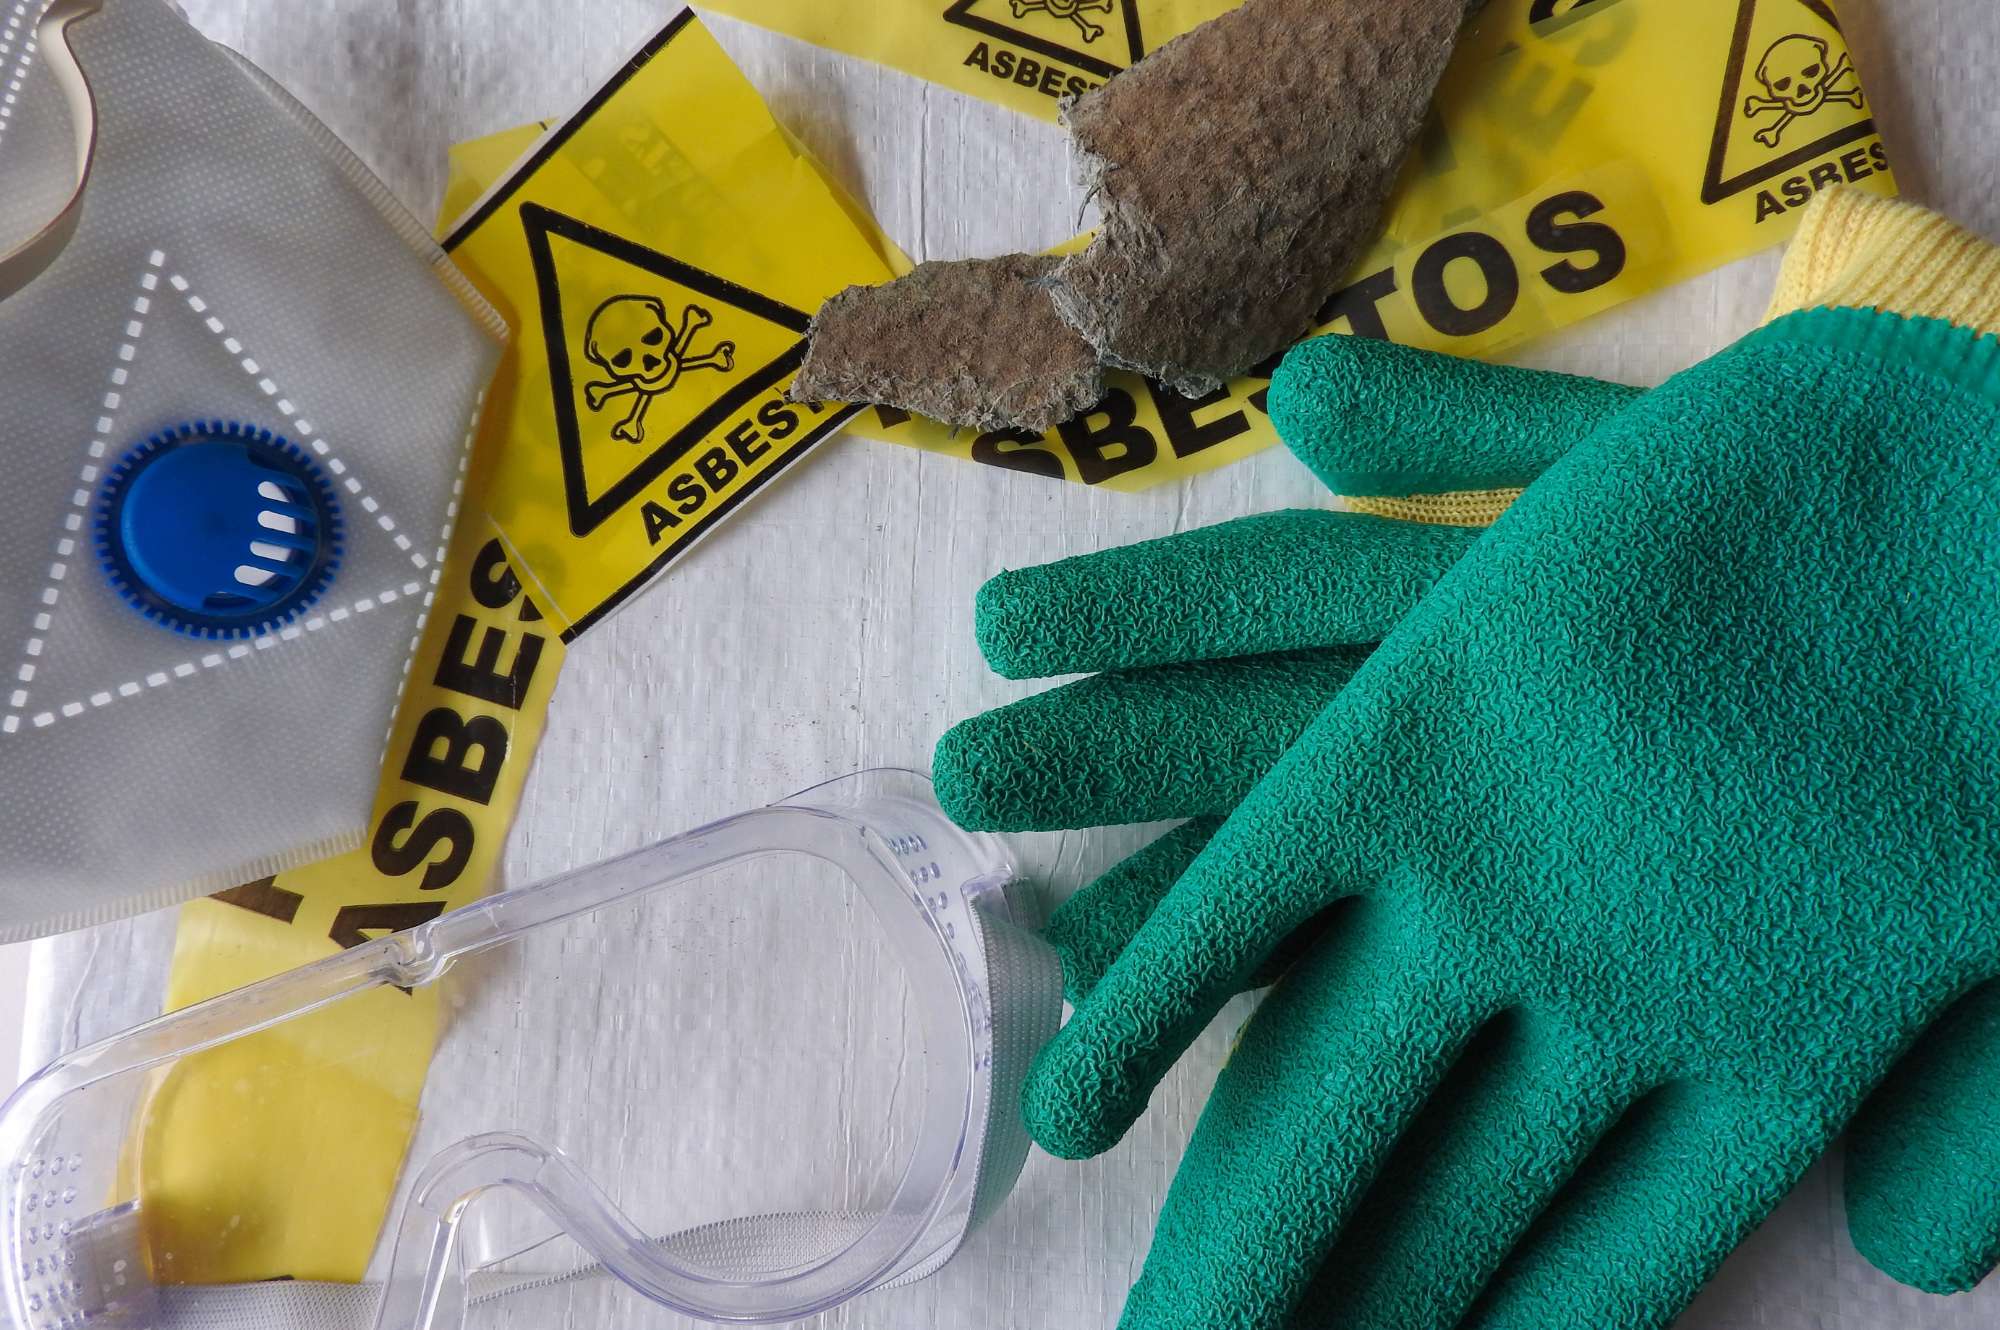 The HSE launches new asbestos awareness campaign